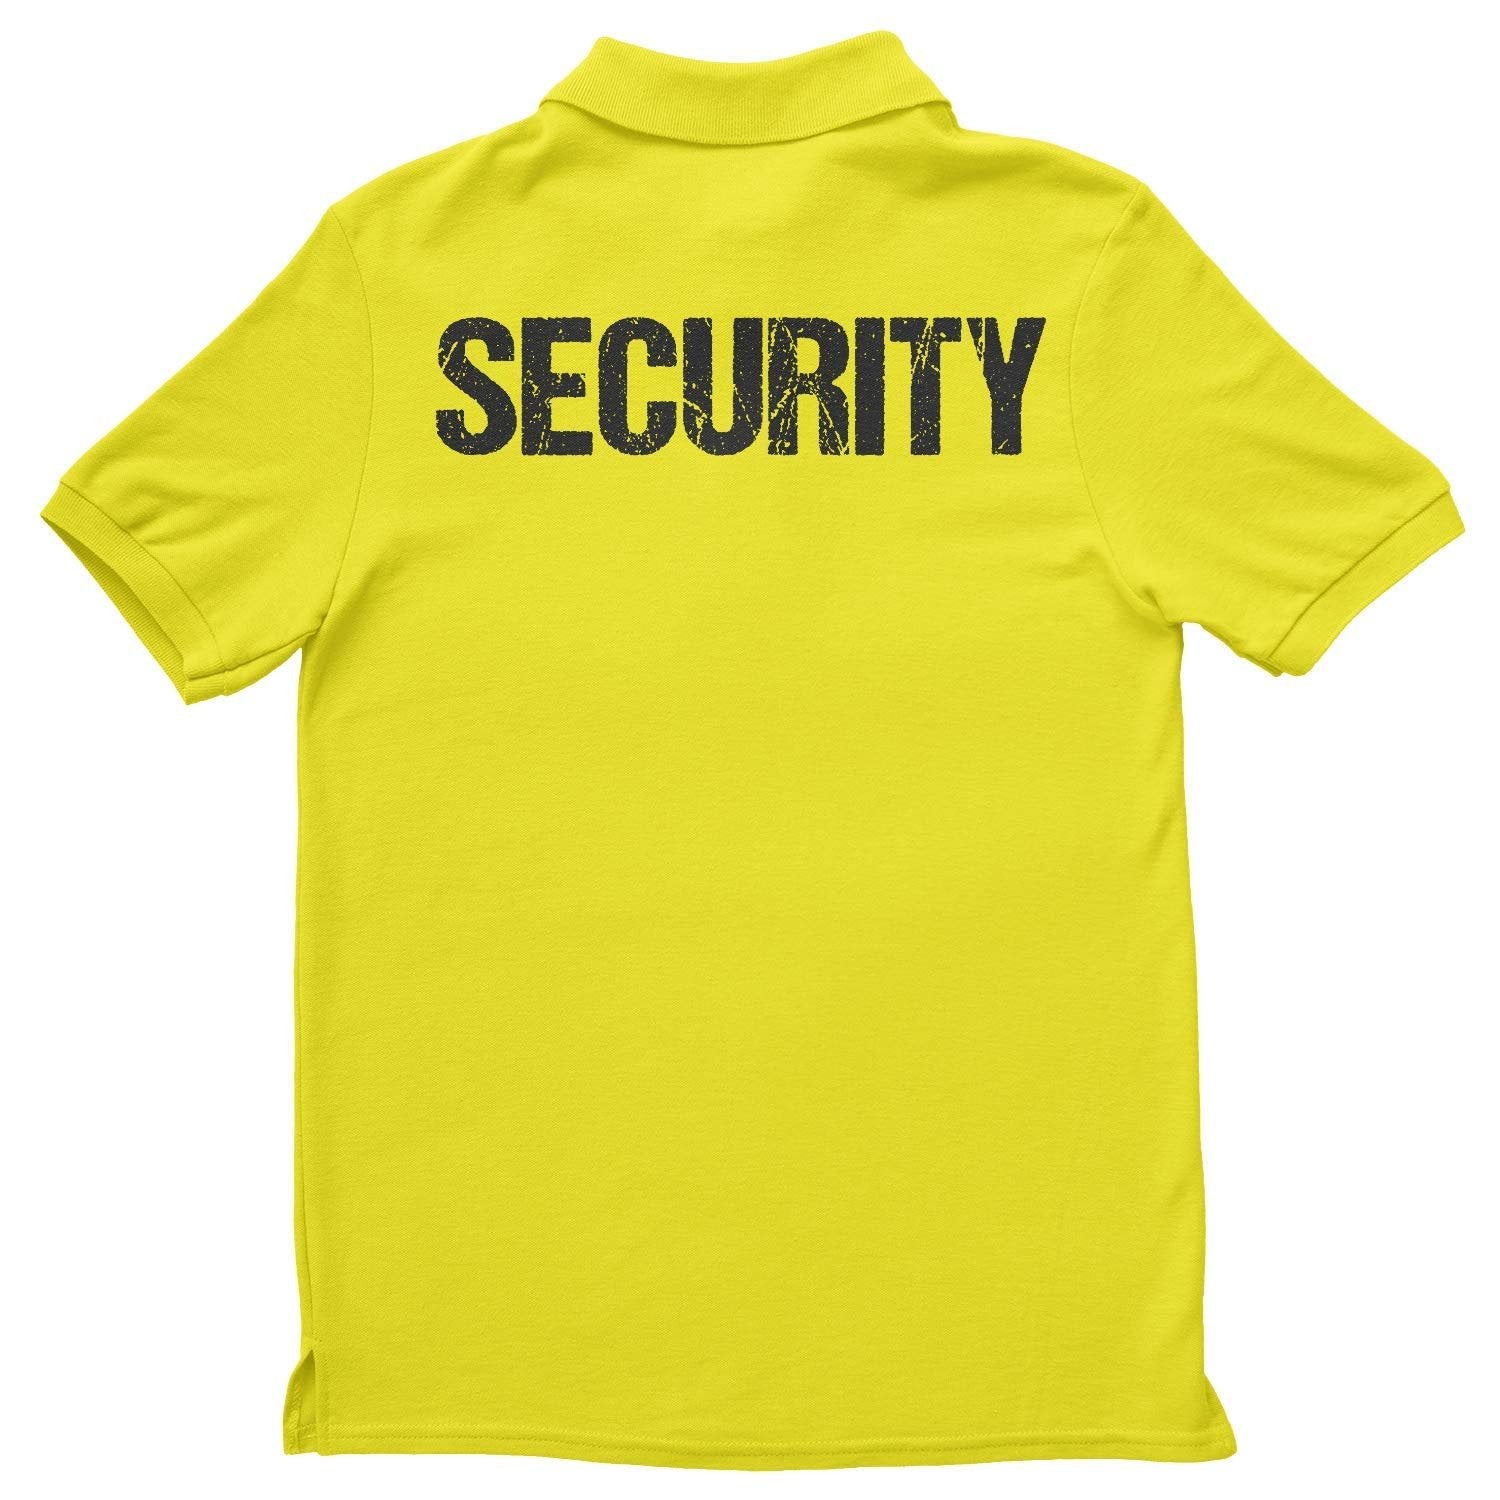 Security Polo Shirt Front & Back Print (Distressed, Safety Green & Black)